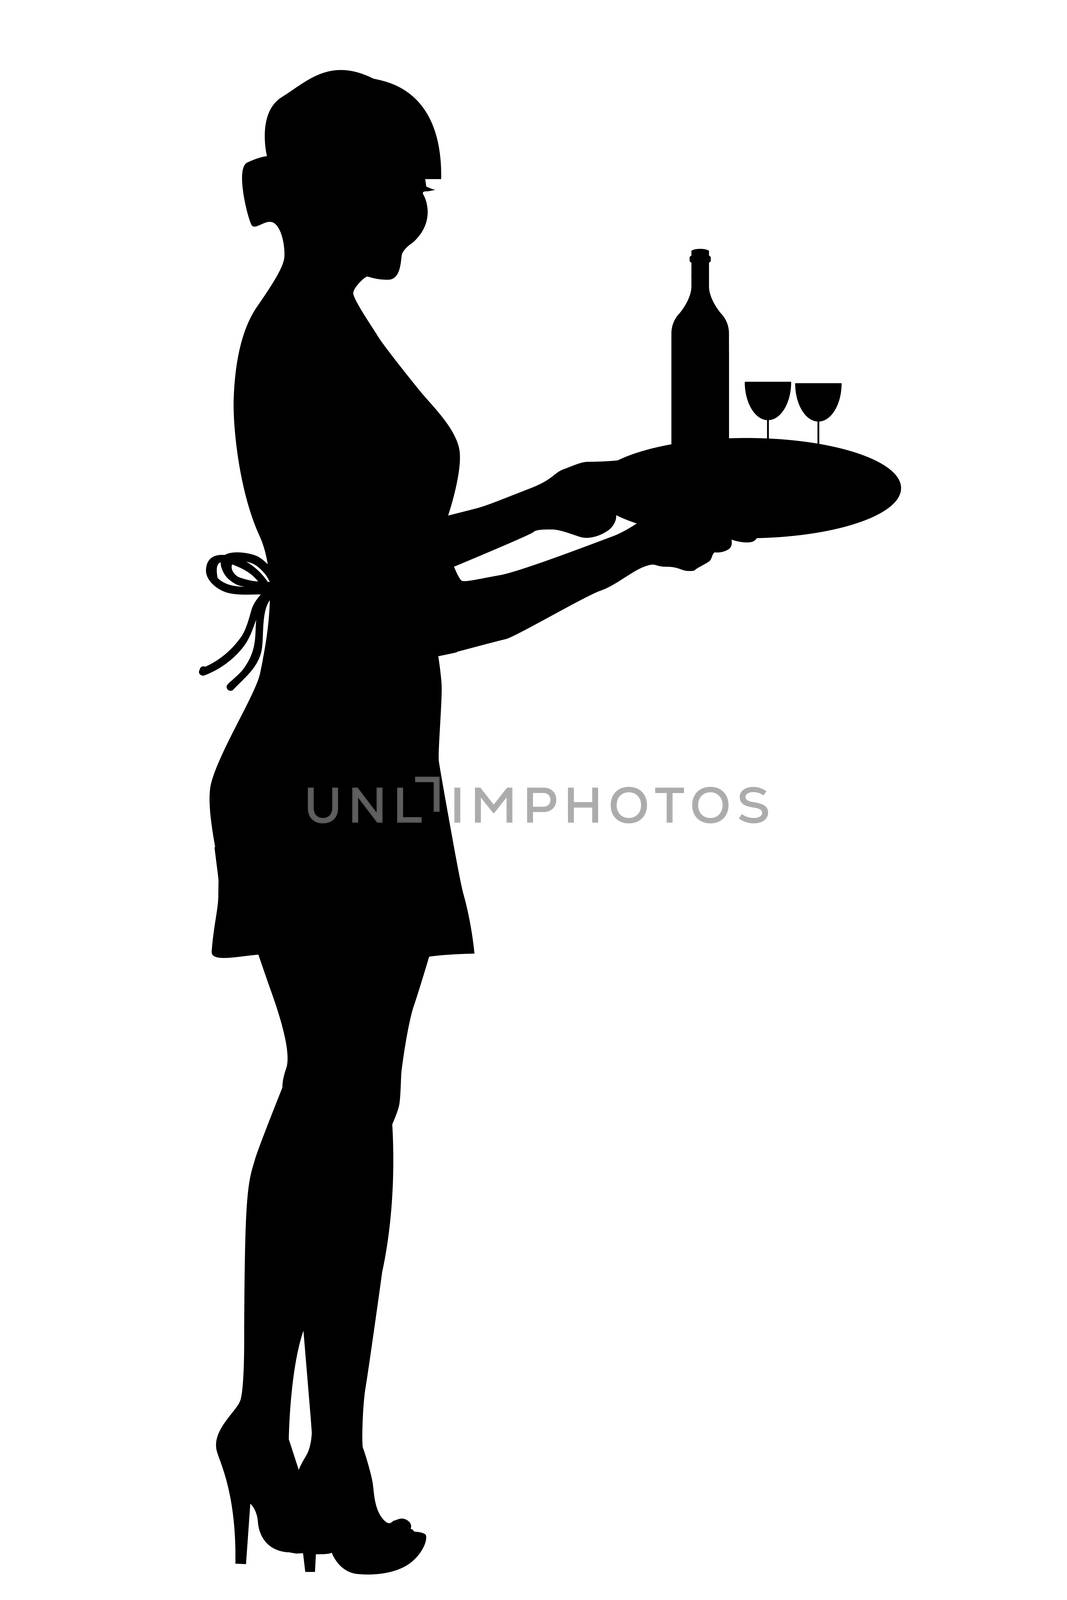 Waitress silhouette holding a tray with wine glasses and a bottle